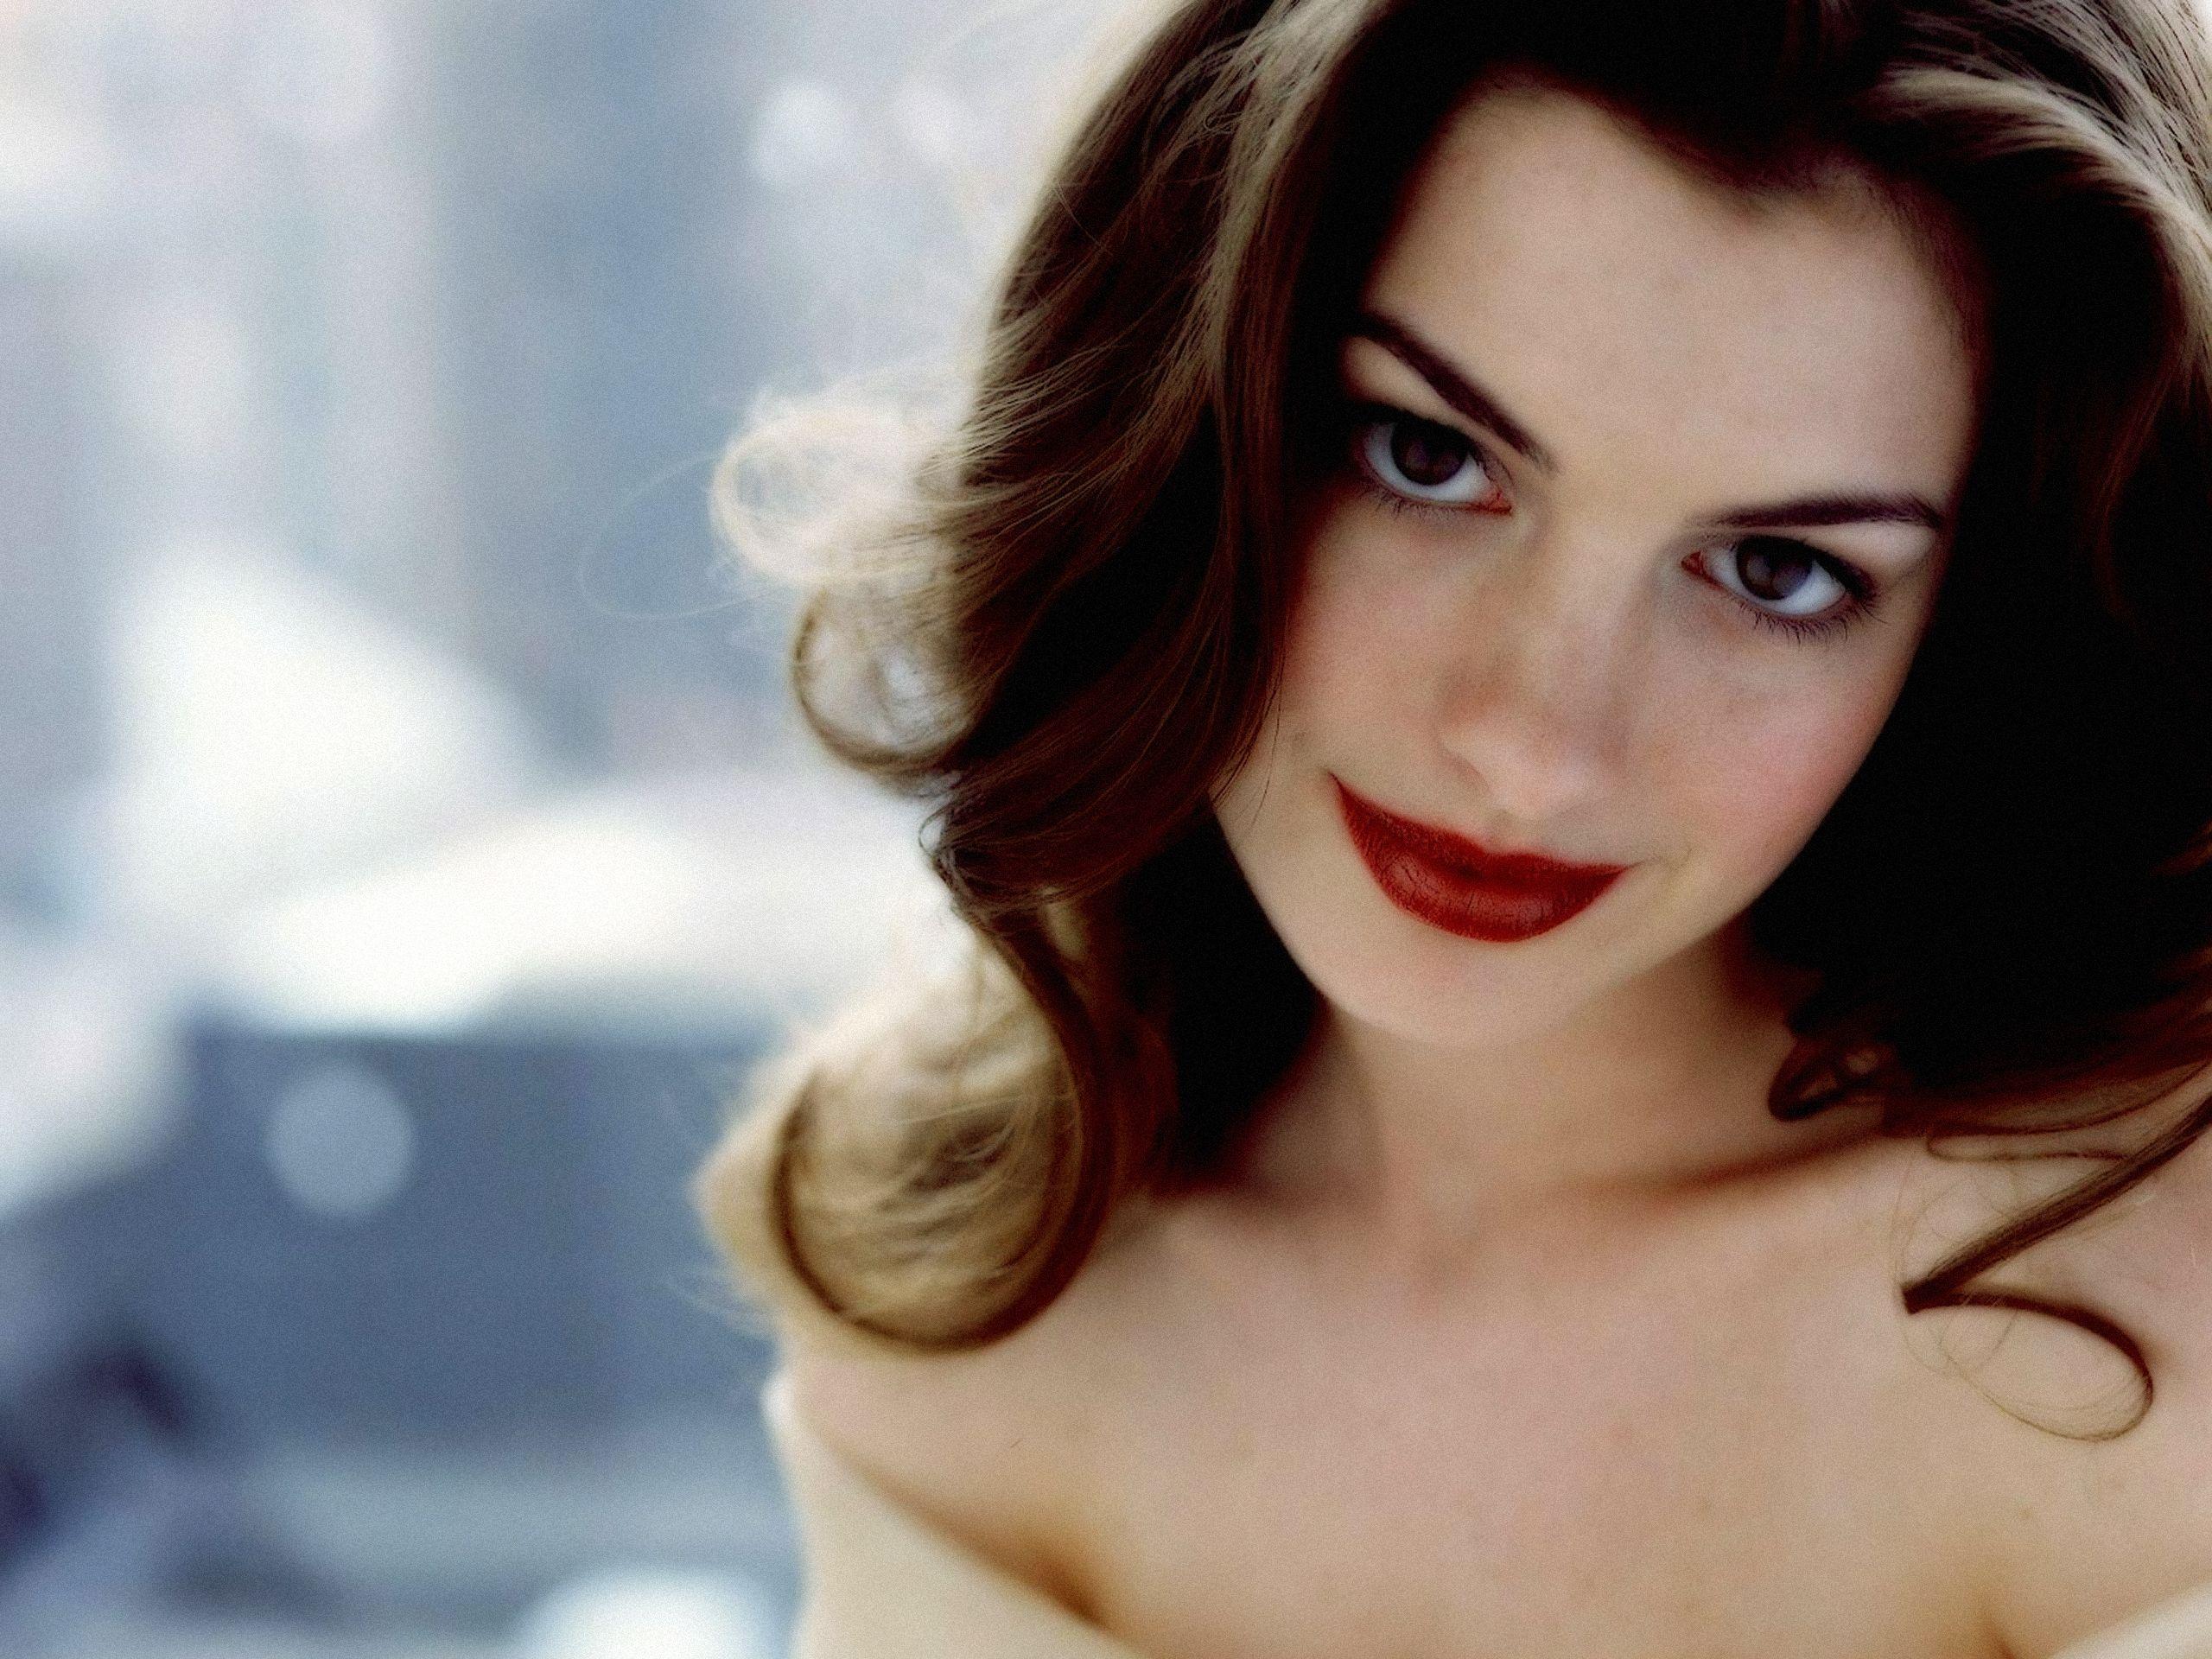 Anne Hathaway. Free Desktop Wallpaper for Widescreen, HD and Mobile